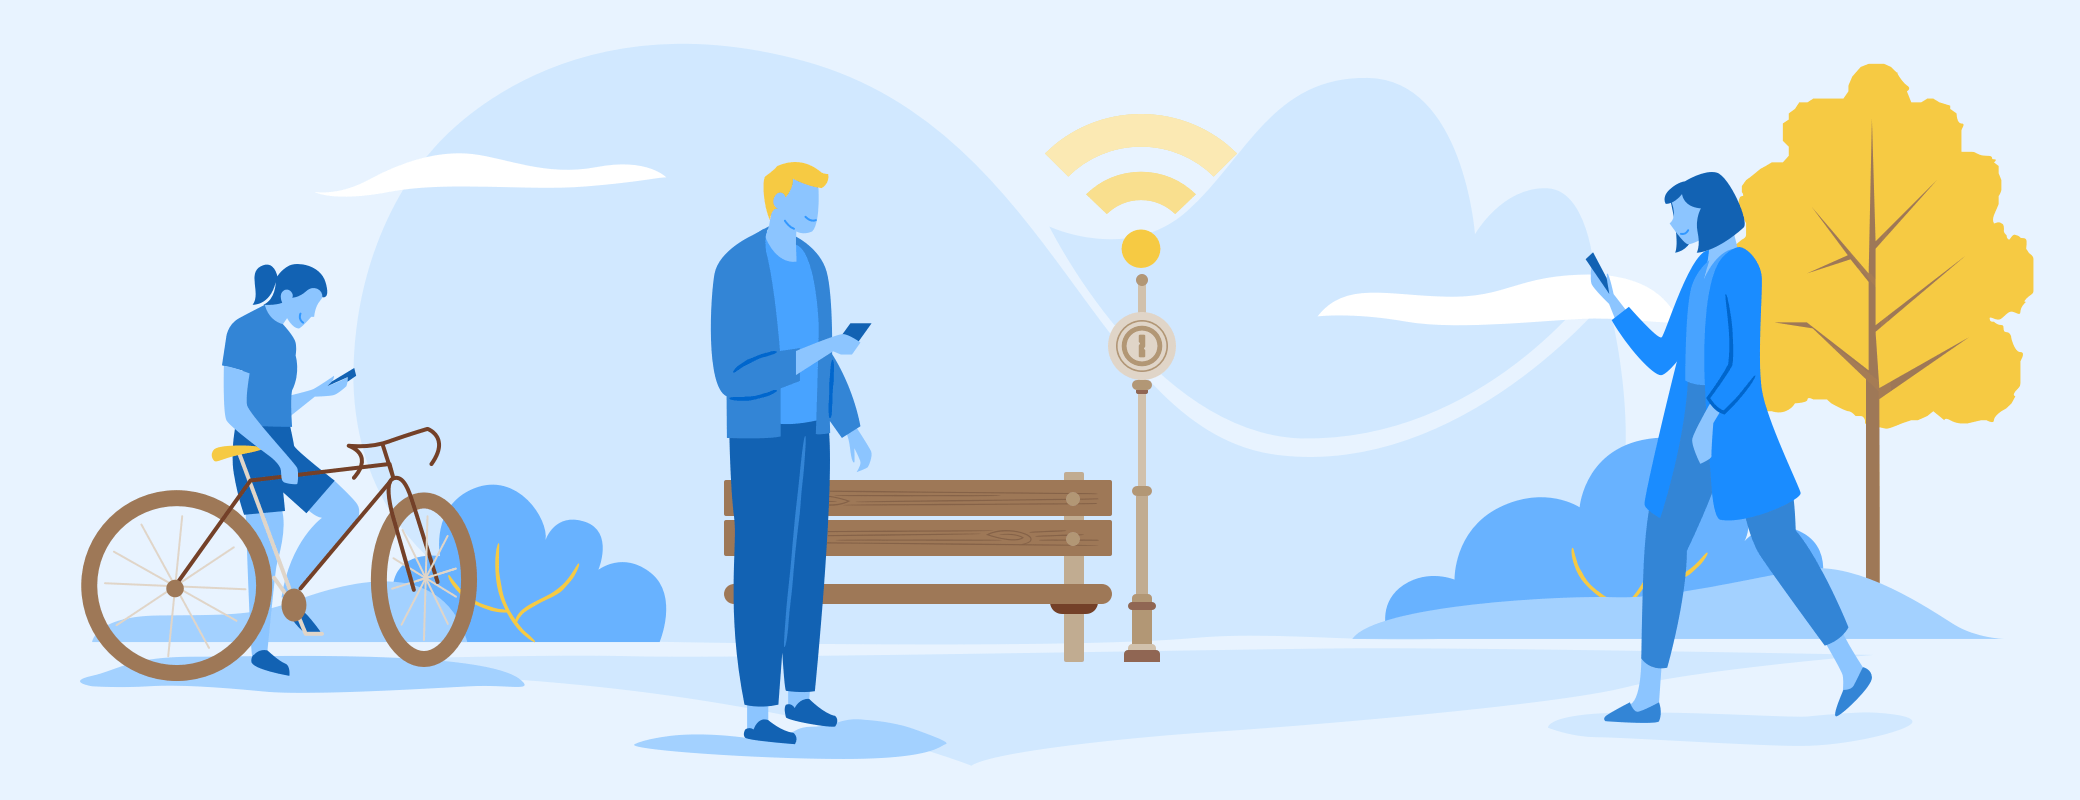 7 security tips to stay safe on public Wi-Fi